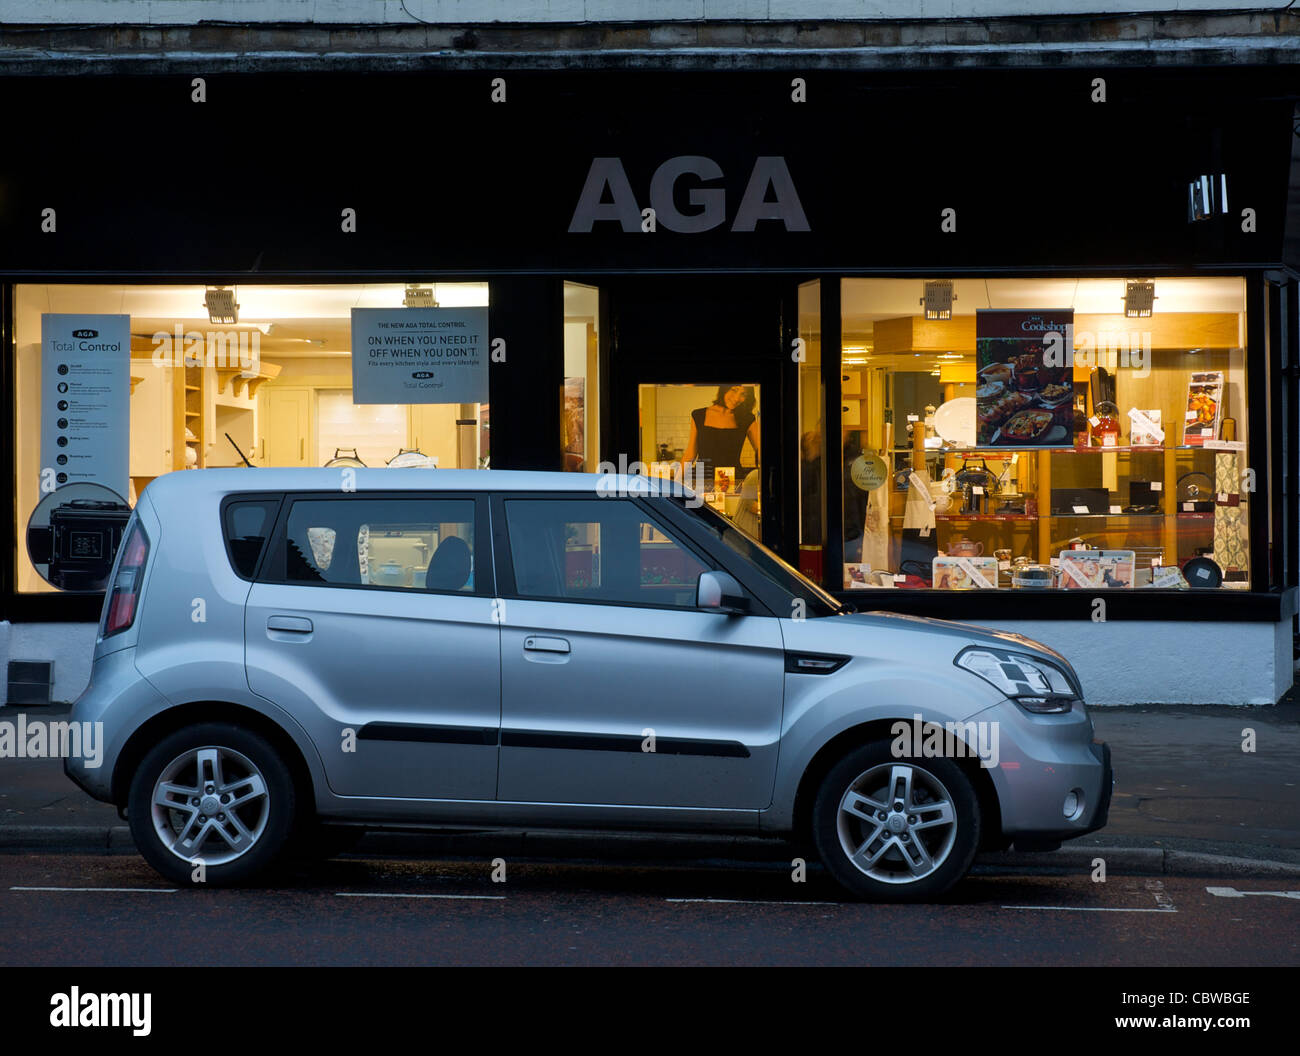 Car parked in front of the Aga shop at night, Kendal, Cumbria, England UK Stock Photo